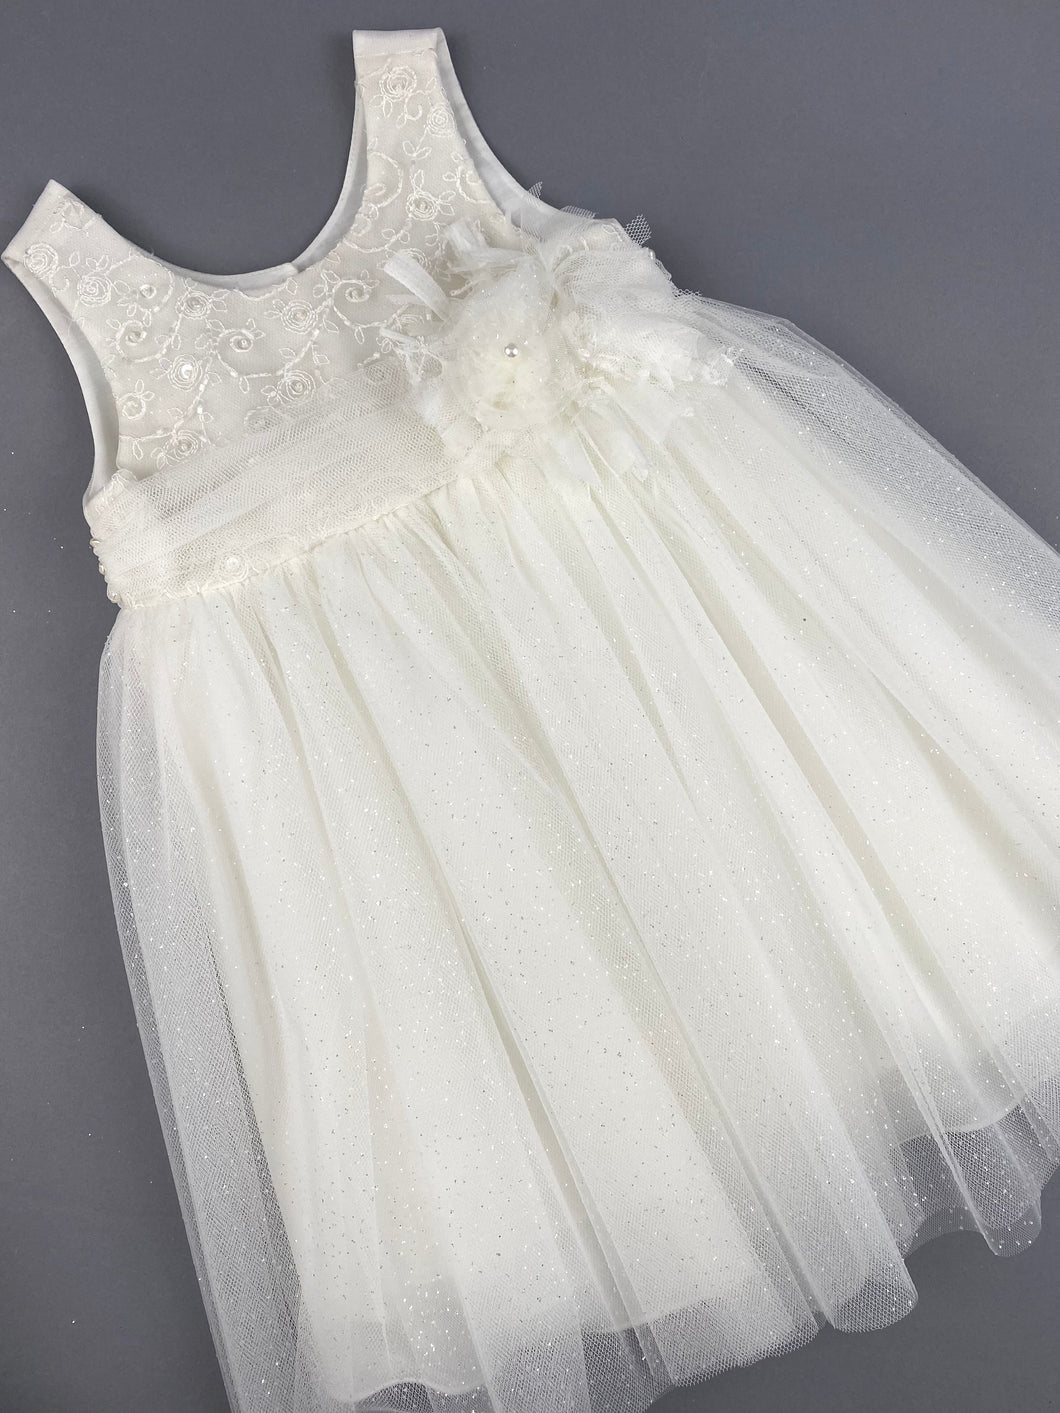 Dress 61 Girls Baptismal Christening Dress with French lace sequence top and glitter skirt, matching Bolero and Hat. Made in Greece exclusively for Rosies Collections.